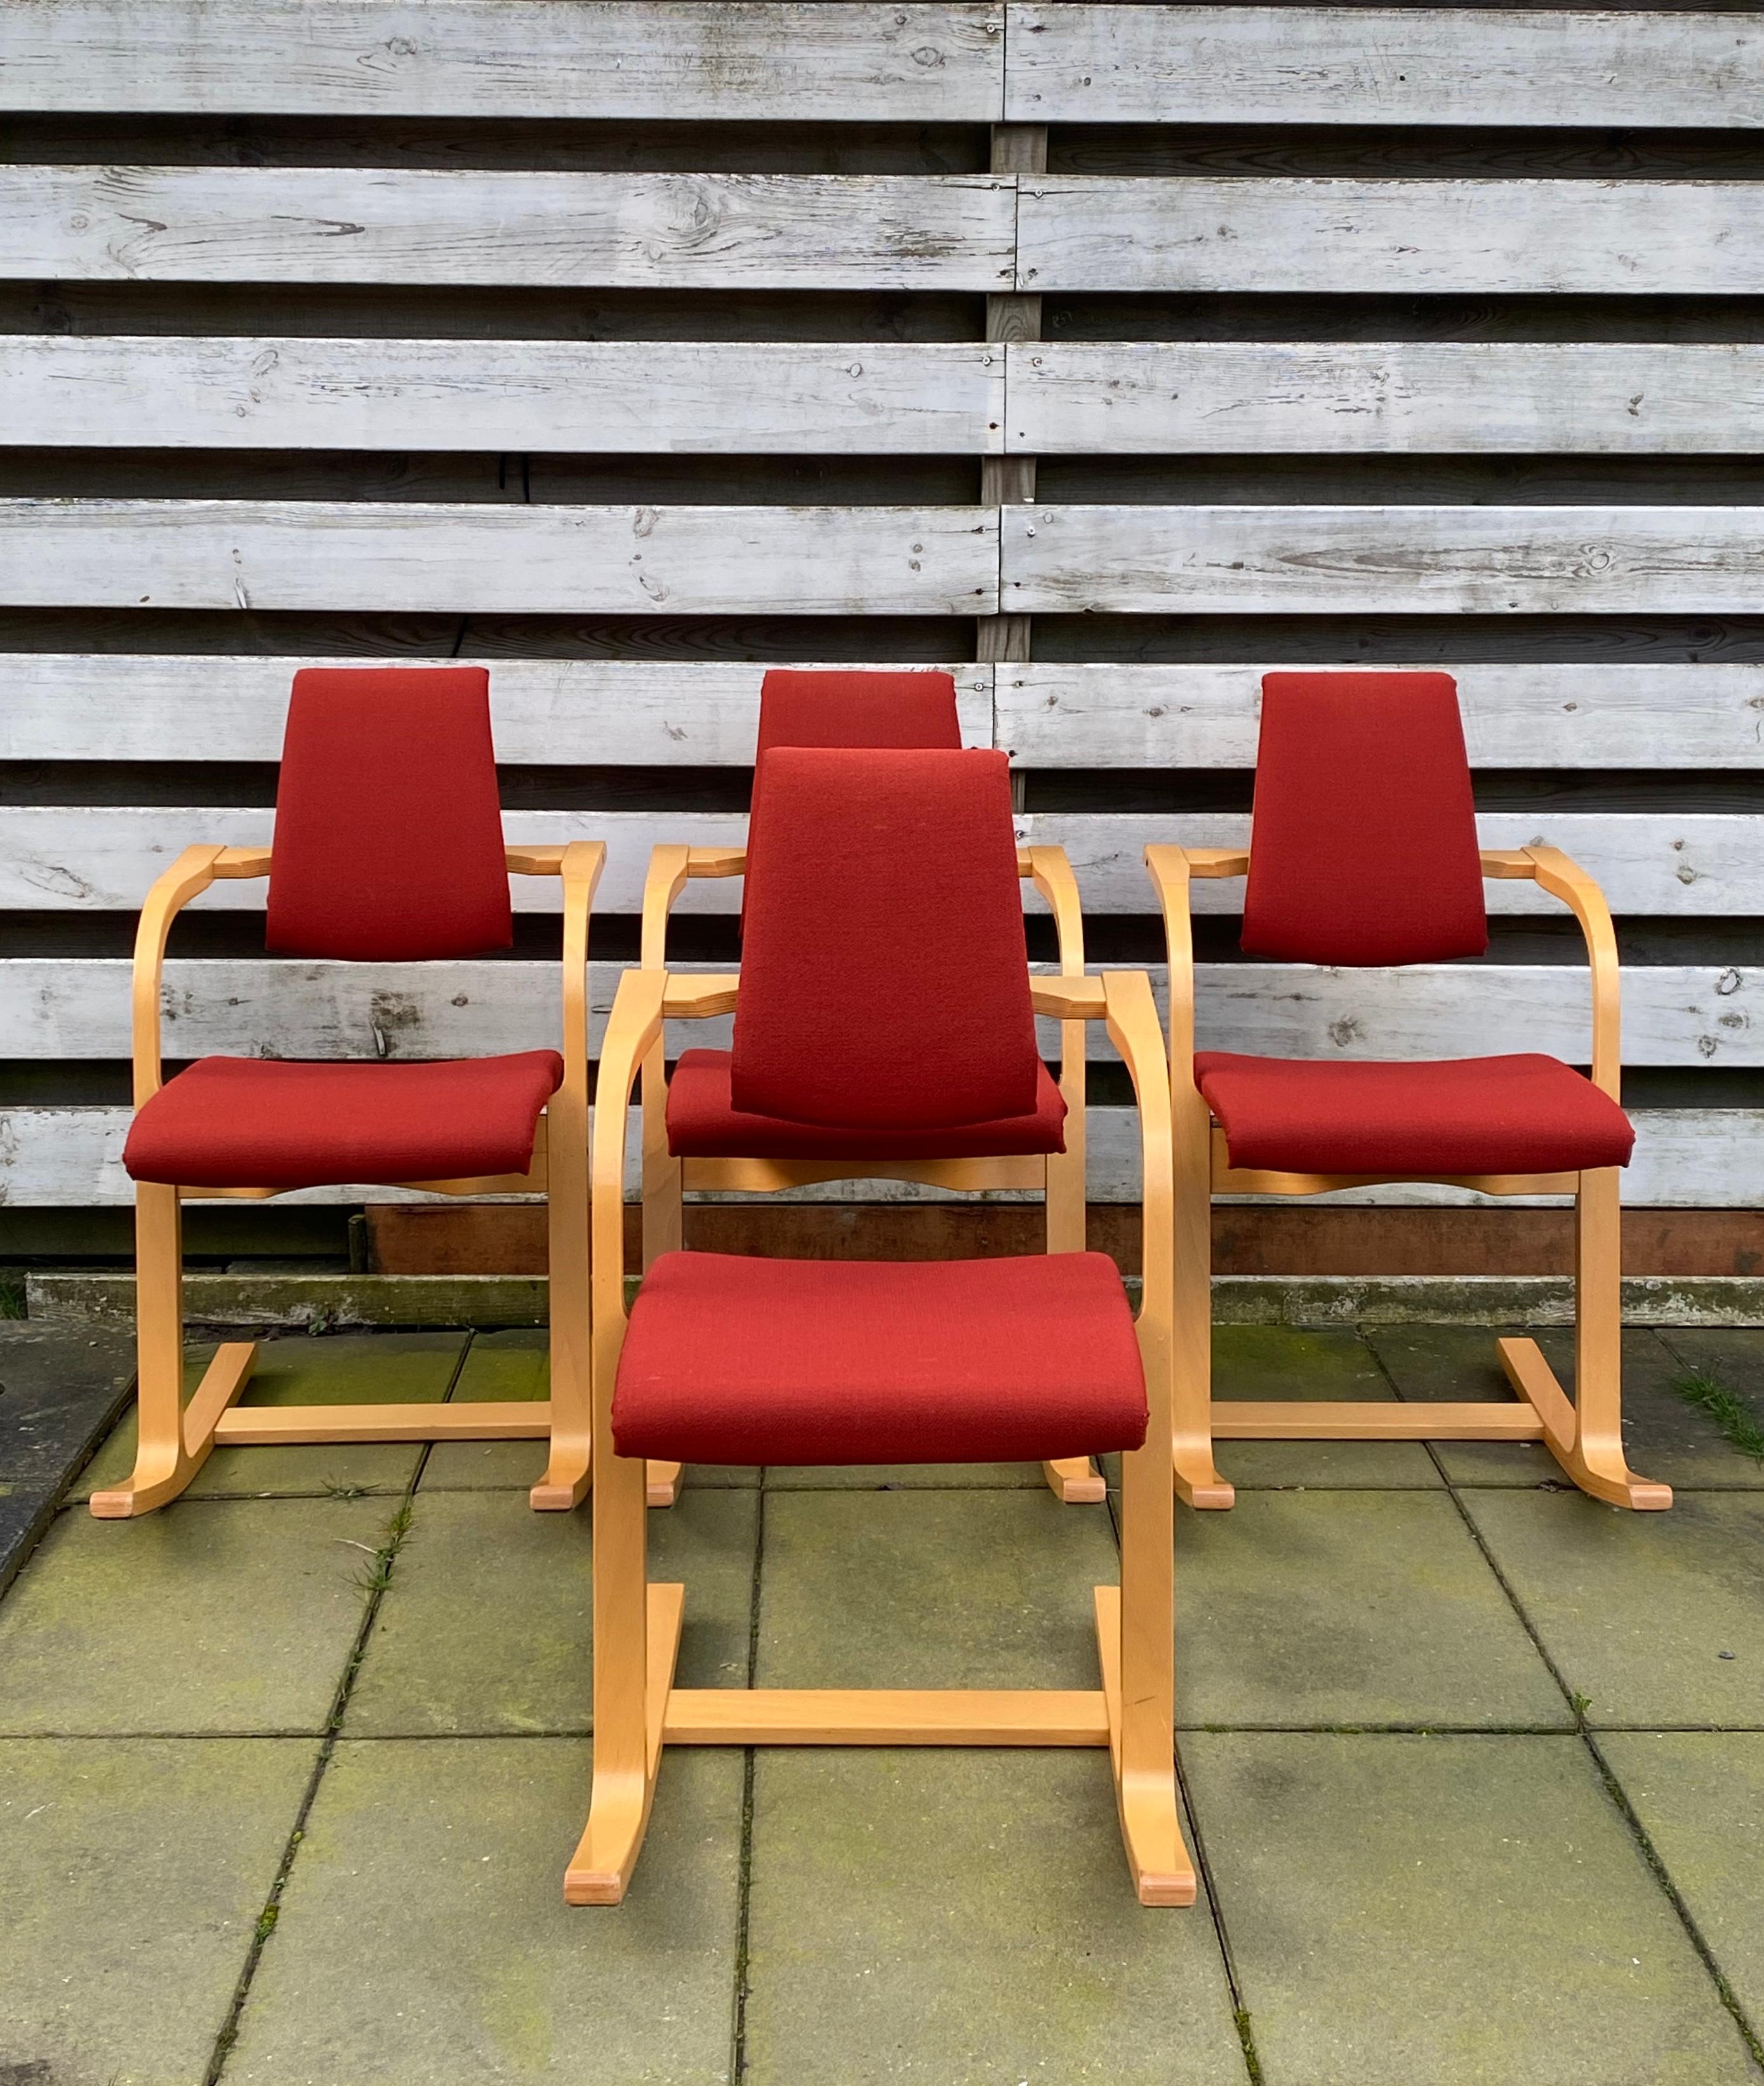 Scandinavian pieces, designed by Peter Opsvik, who also designed the Iconic Tripp Trapp chair for children, and manufactured by Stokke in 2005. The chairs feature a Beech base and deep red fabric. They remain in very good condition, with wear